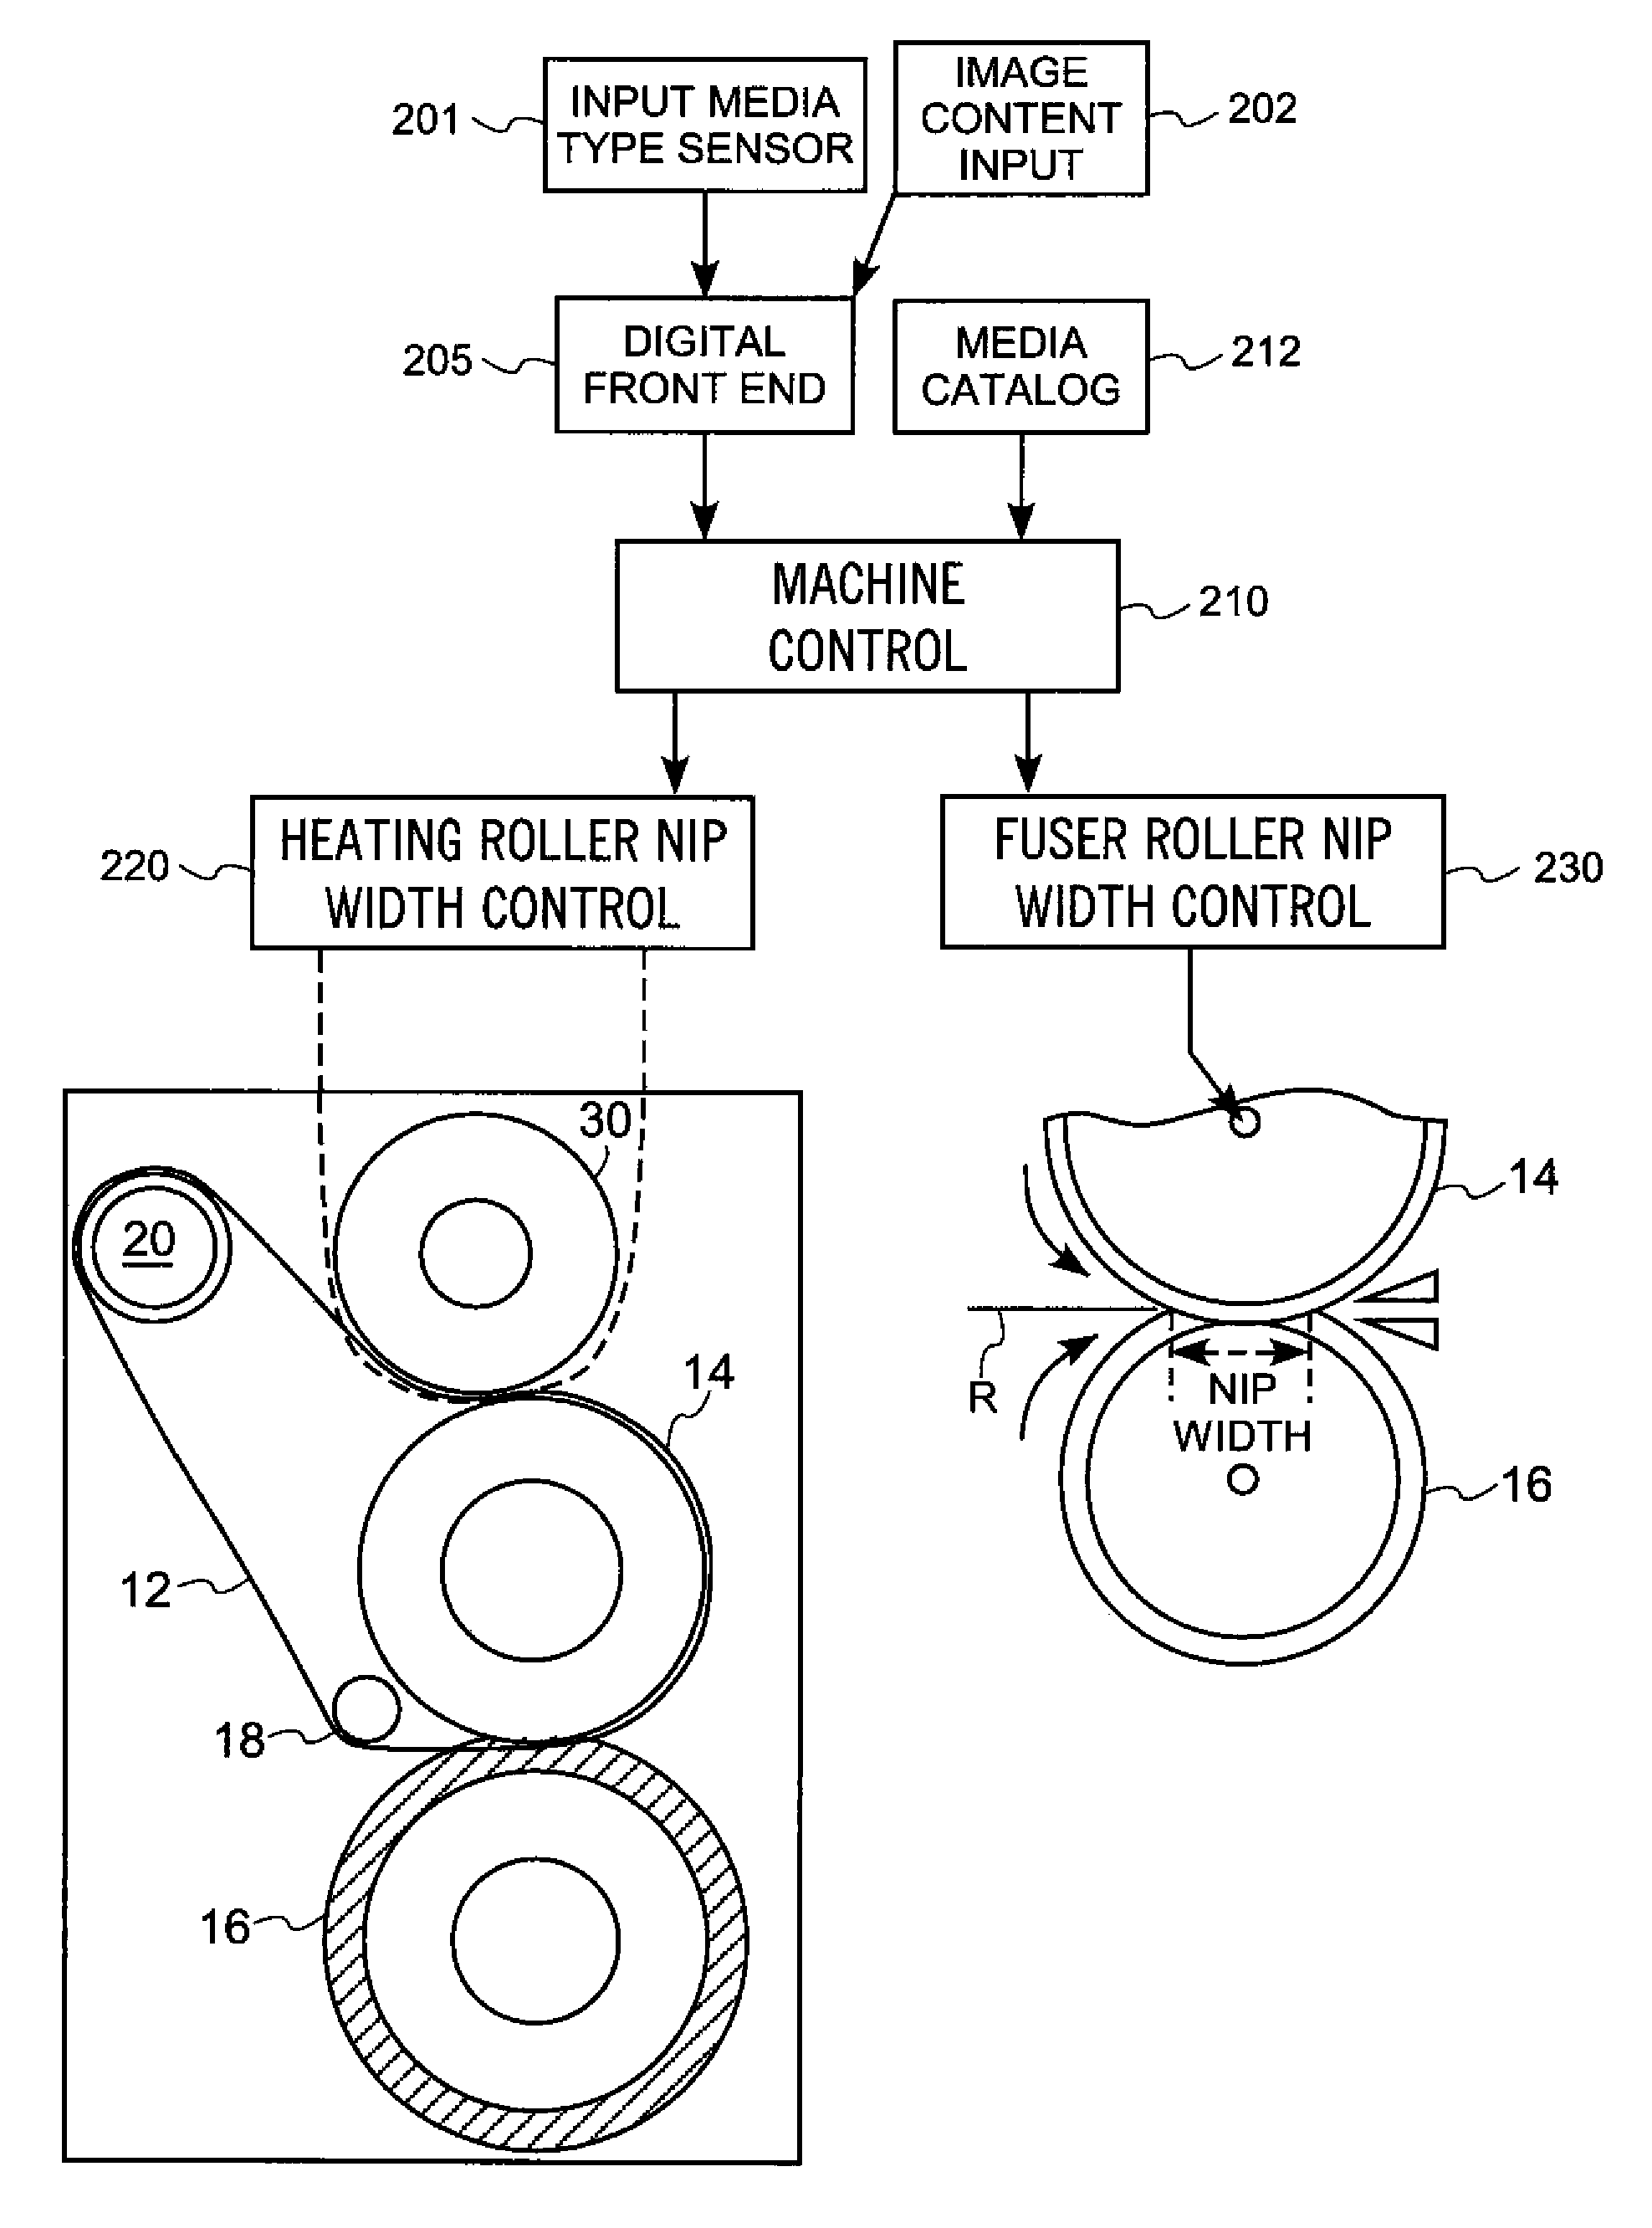 Fusing apparatus for high speed electrophotography system